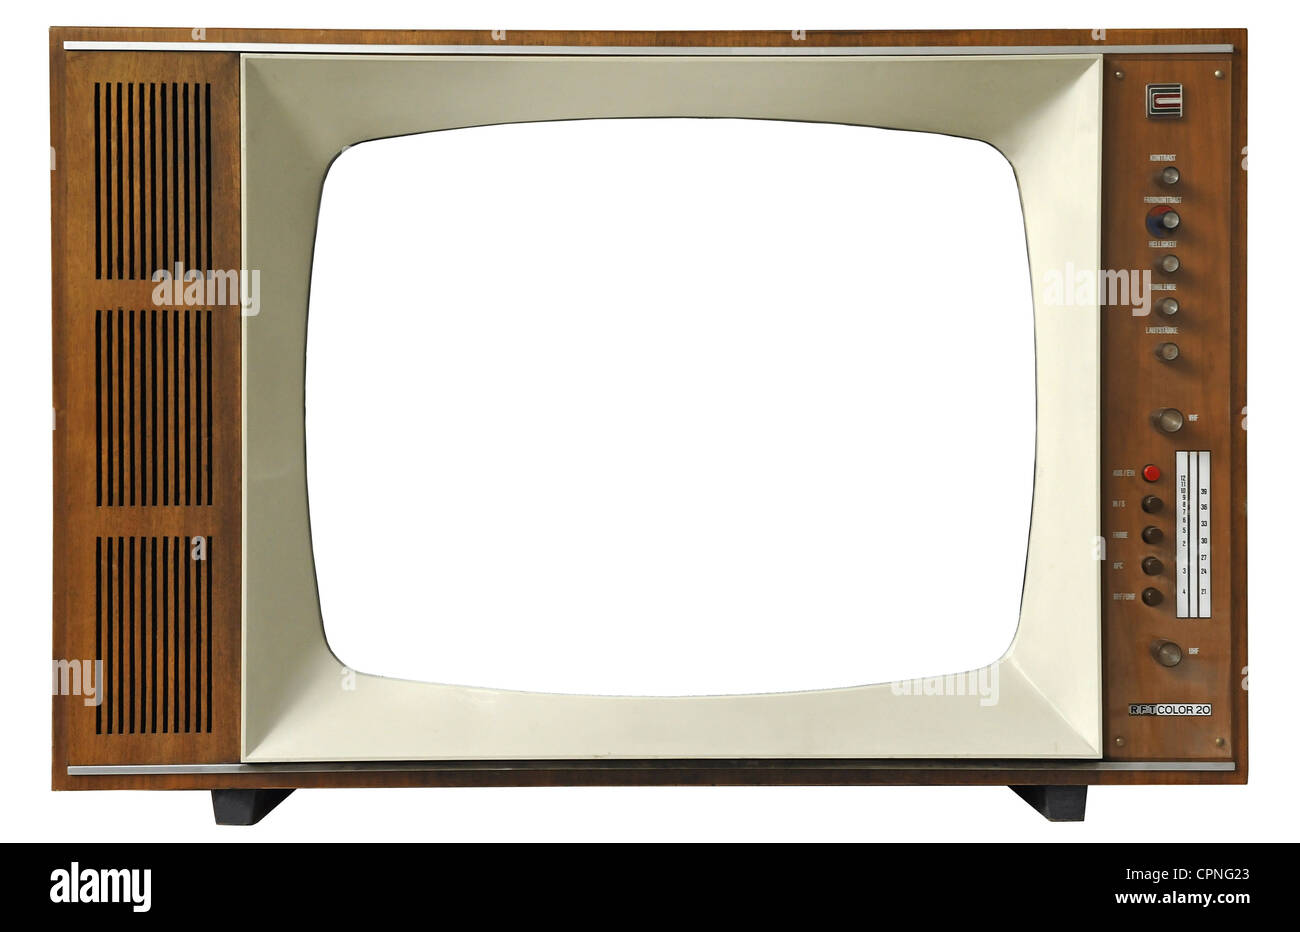 First Colour Tv Set High Resolution Stock Photography and Images - Alamy